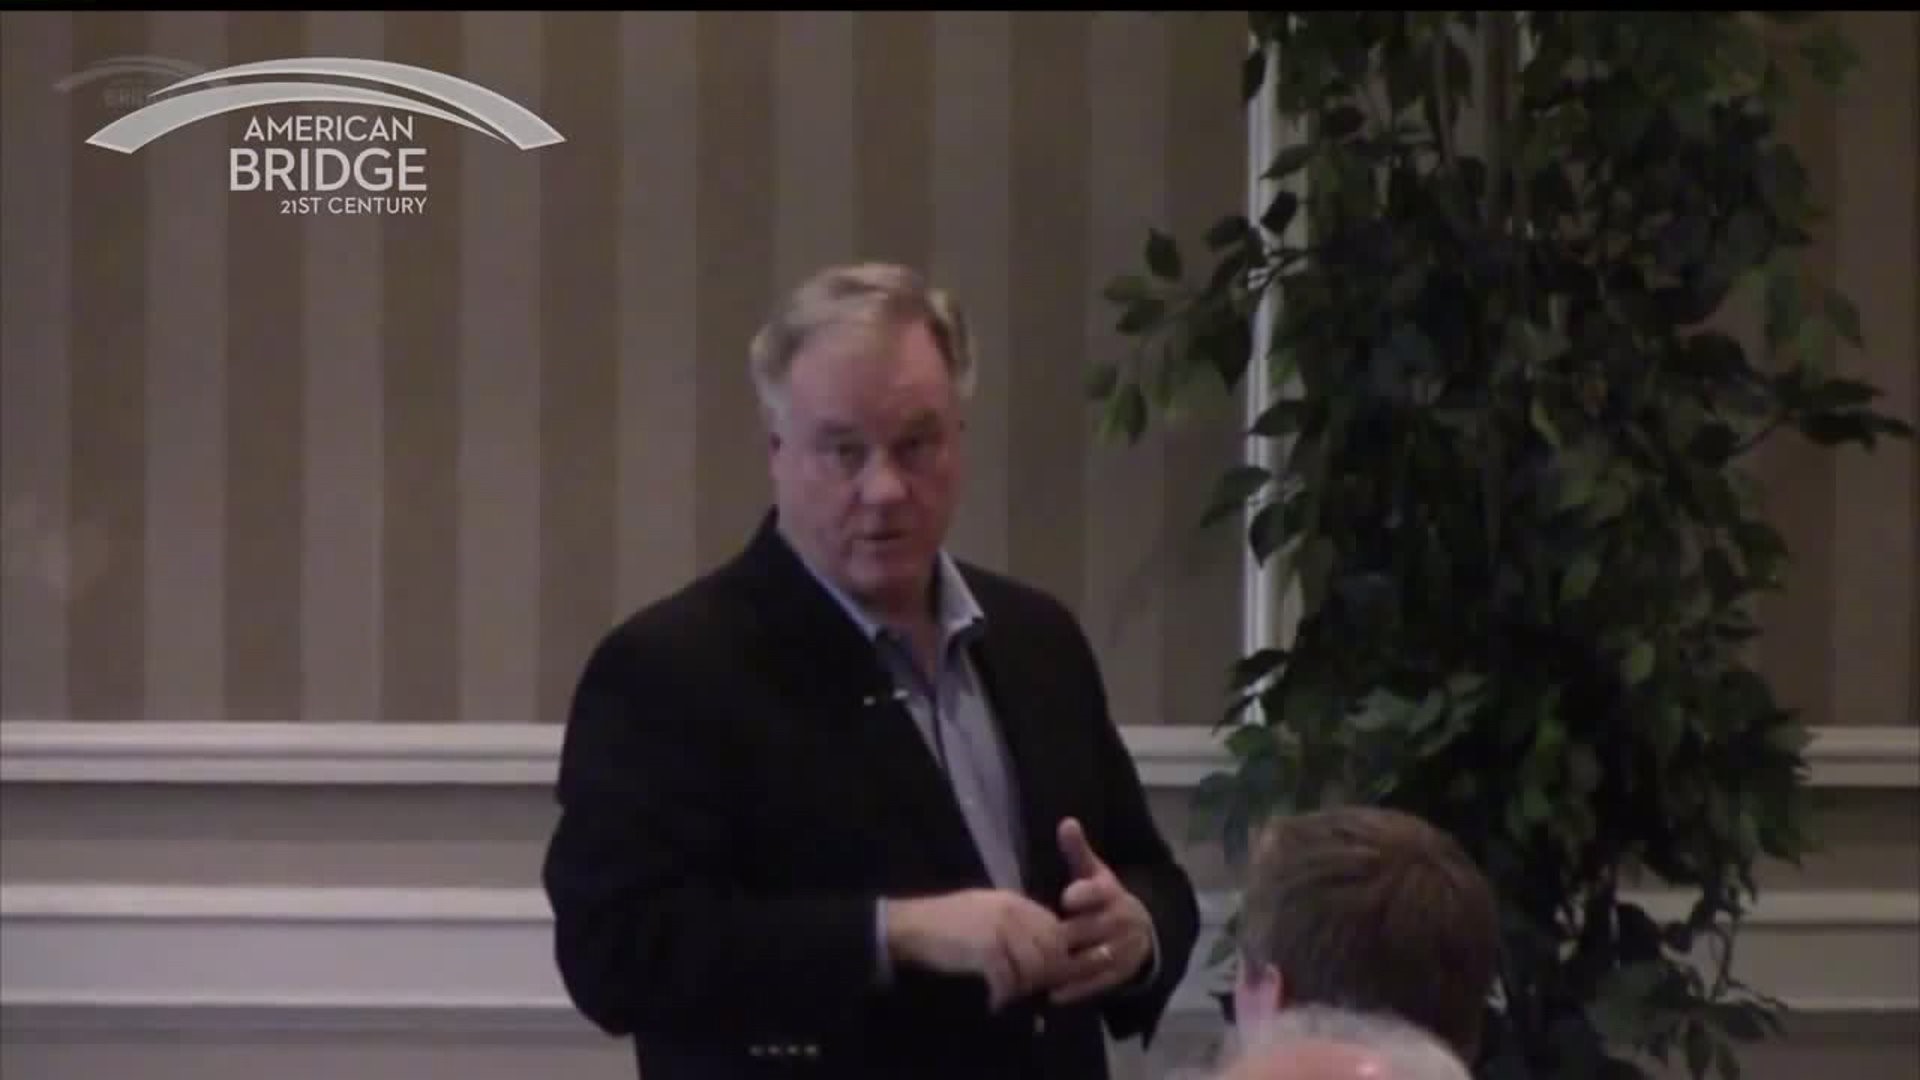 State Senator Scott Wagner takes camera from tracker at private event